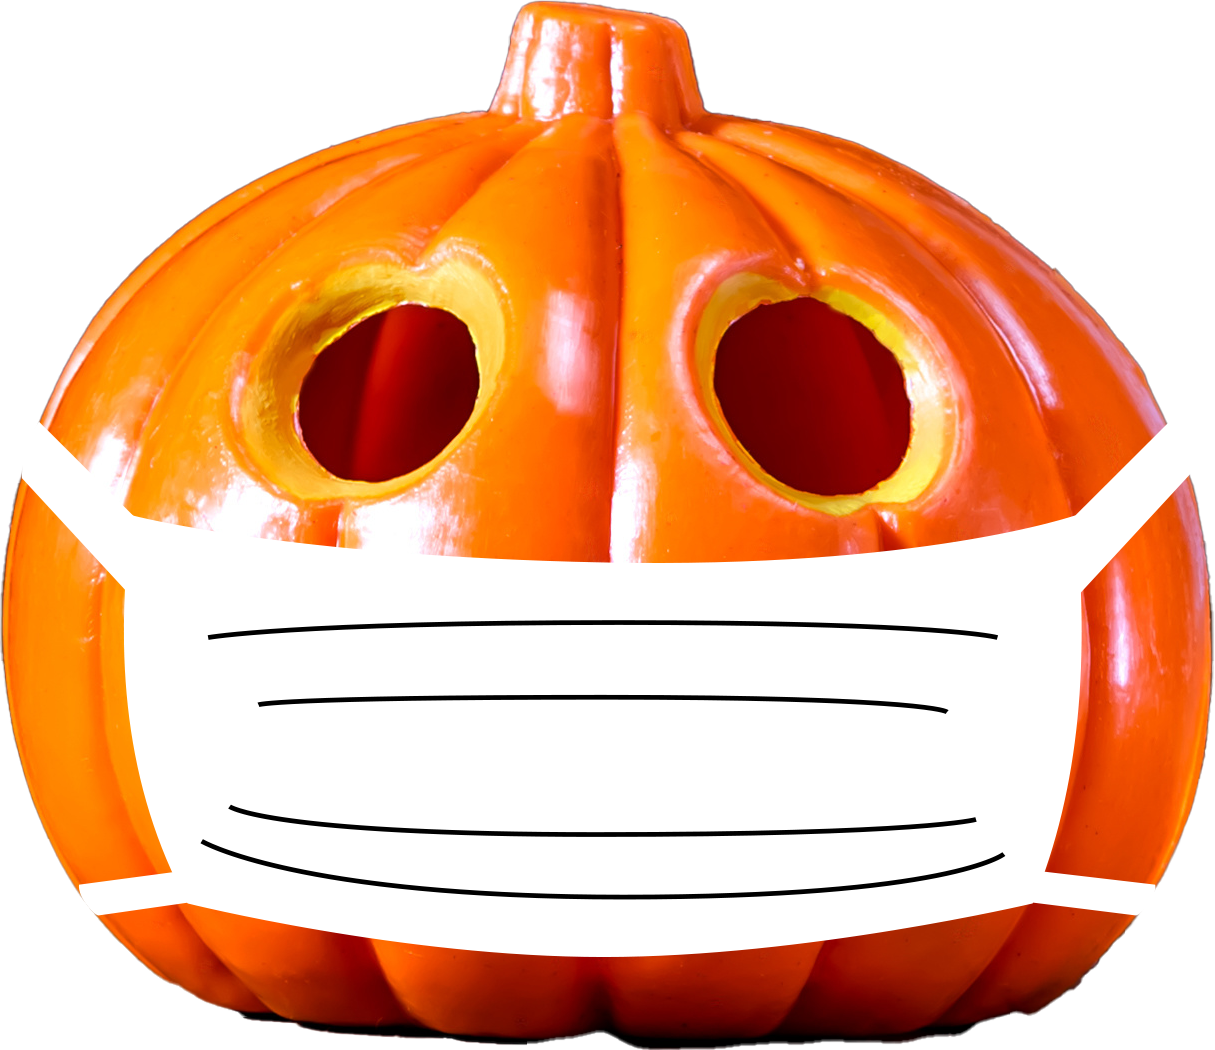 A Jack-O-Lantern wearing a mask to protect the community from COVID-19